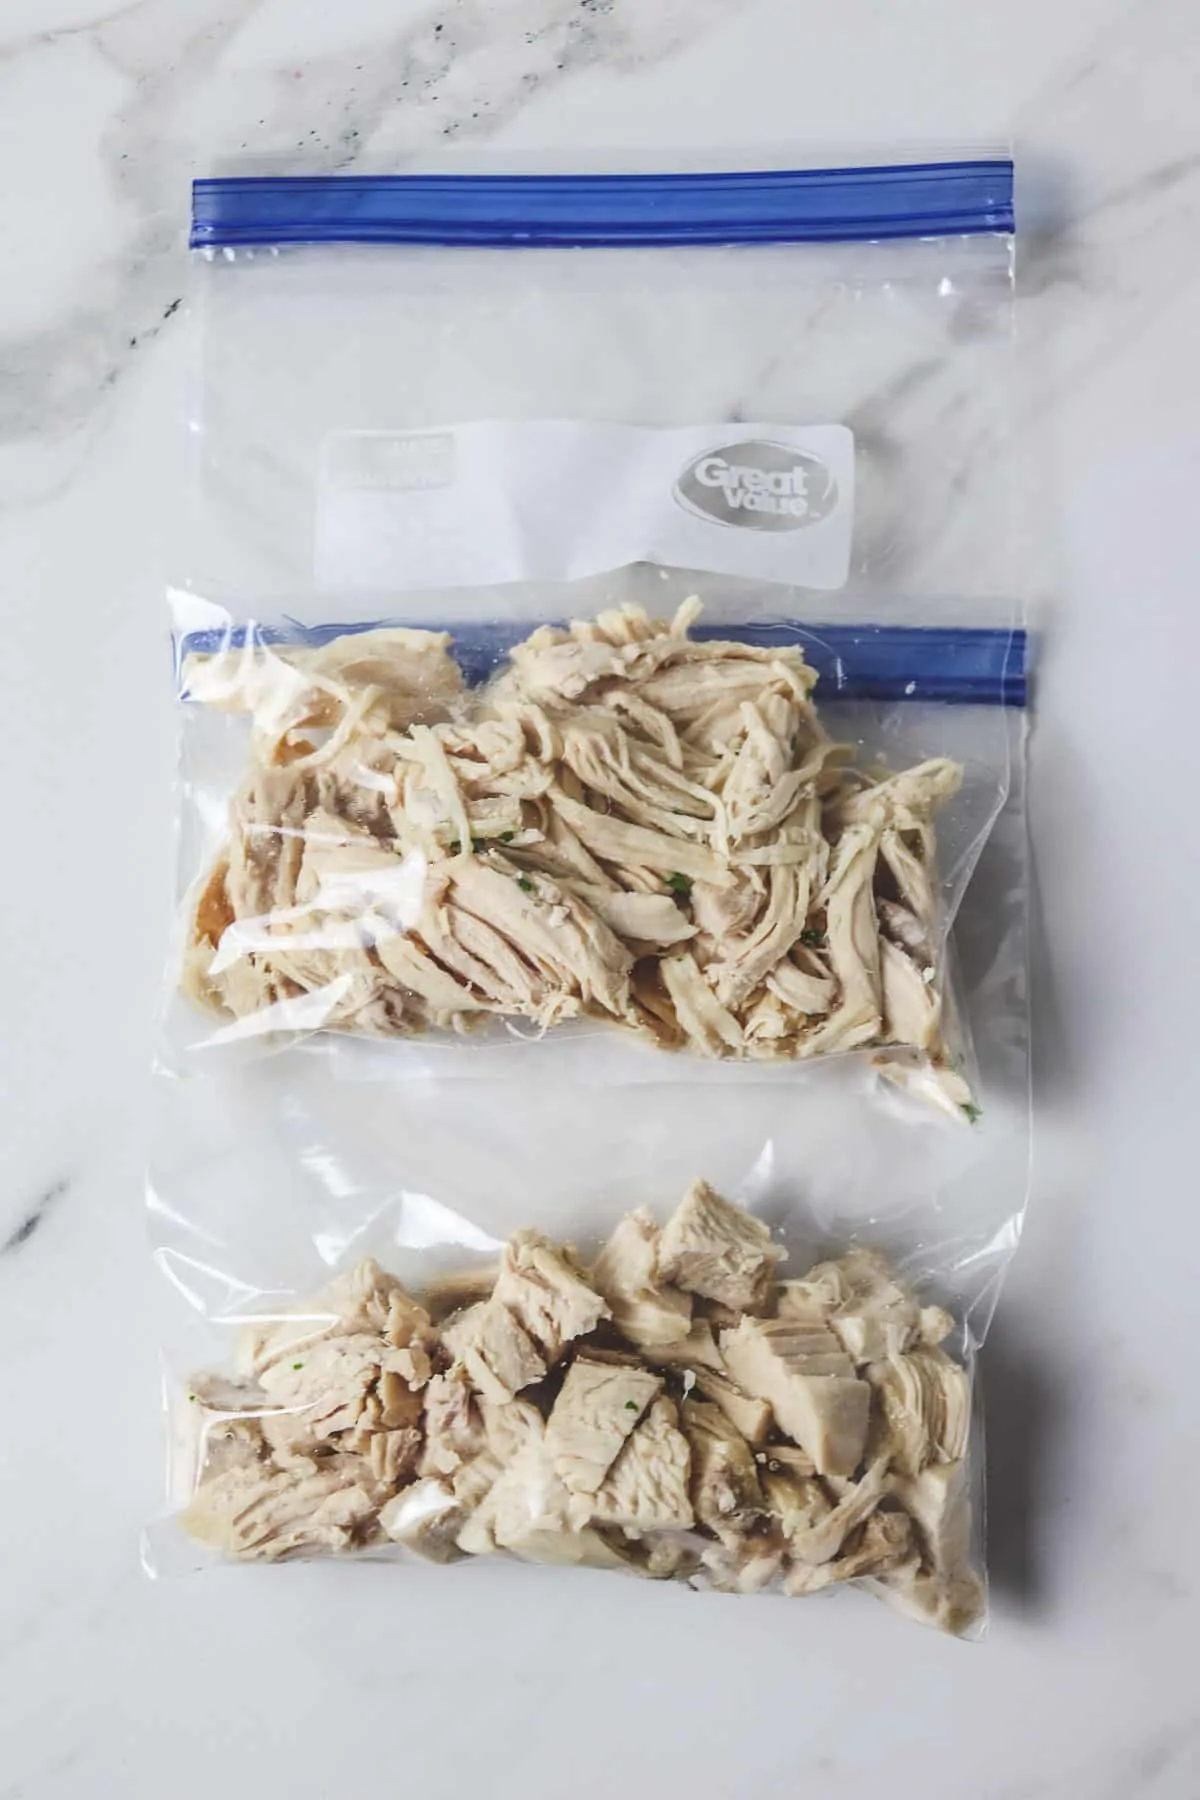 shredded and diced chicken in plastic bags ready to freeze